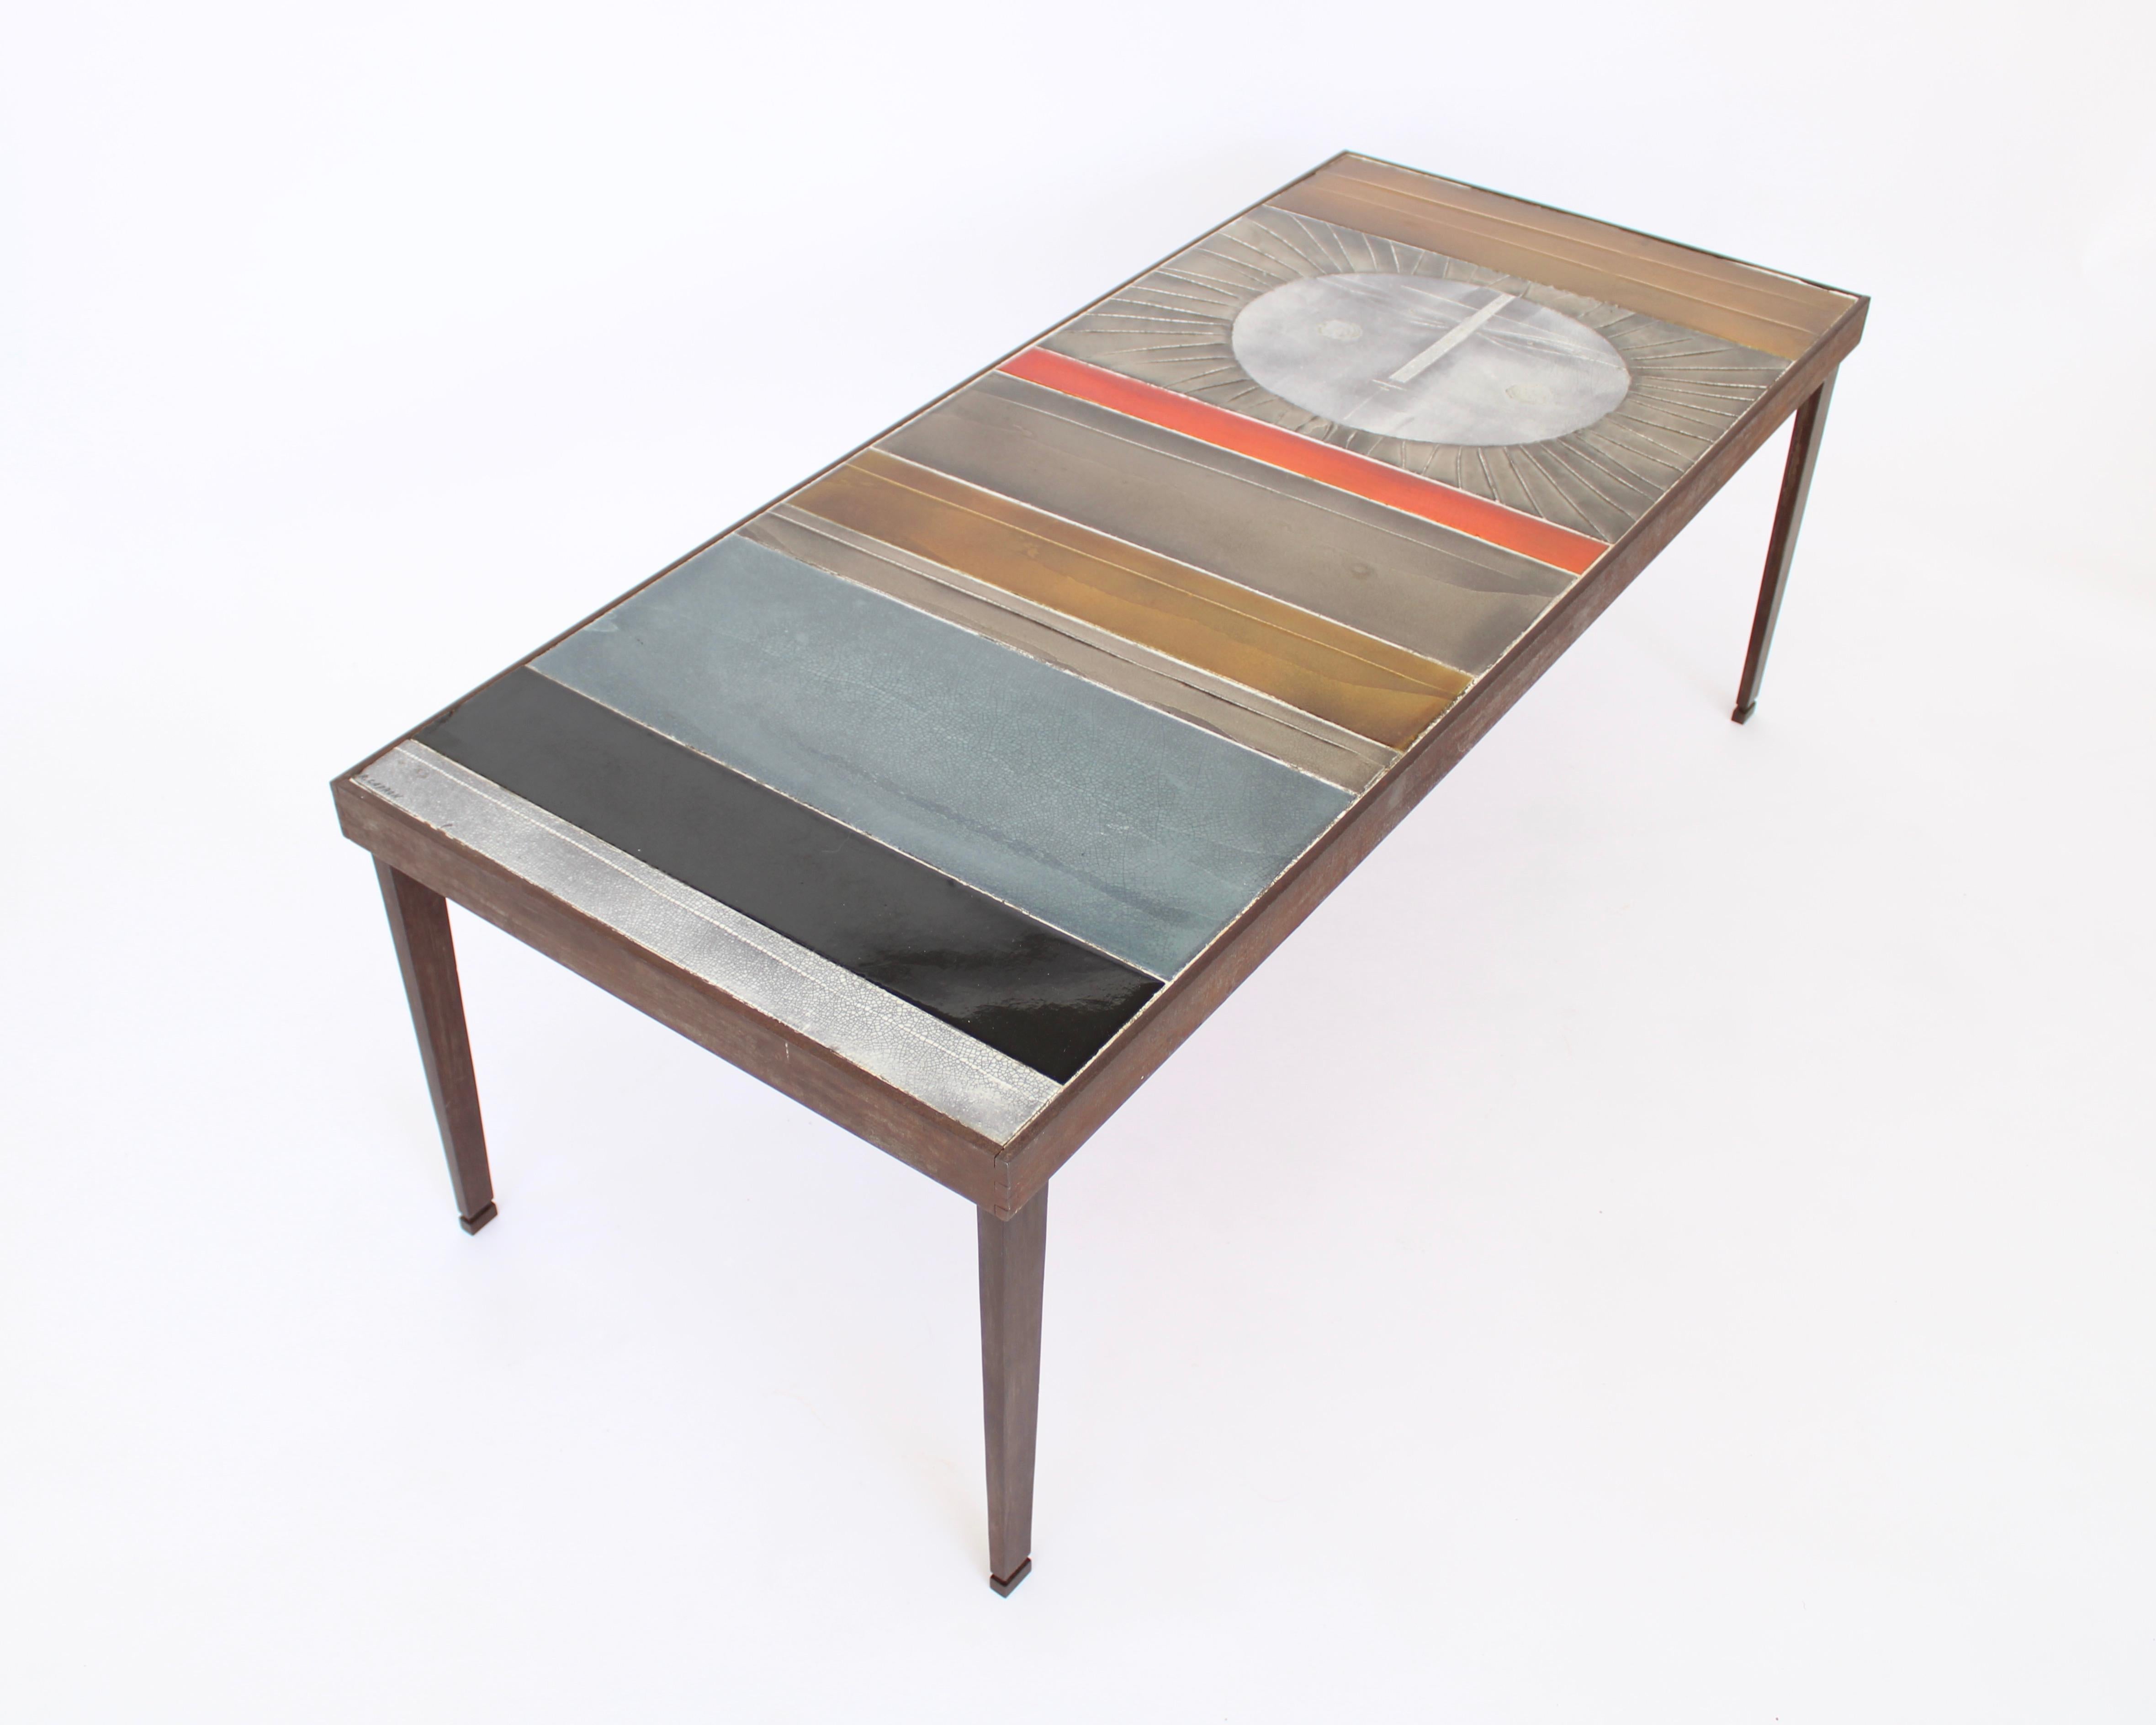 Exceptional table composed colorful abstract ceramics on a steel structure covered in, one of which is a large radiant sun. This is the large edition and an iconic piece by Roger Capron, one of the greatest post war French Ceramicists.
This image